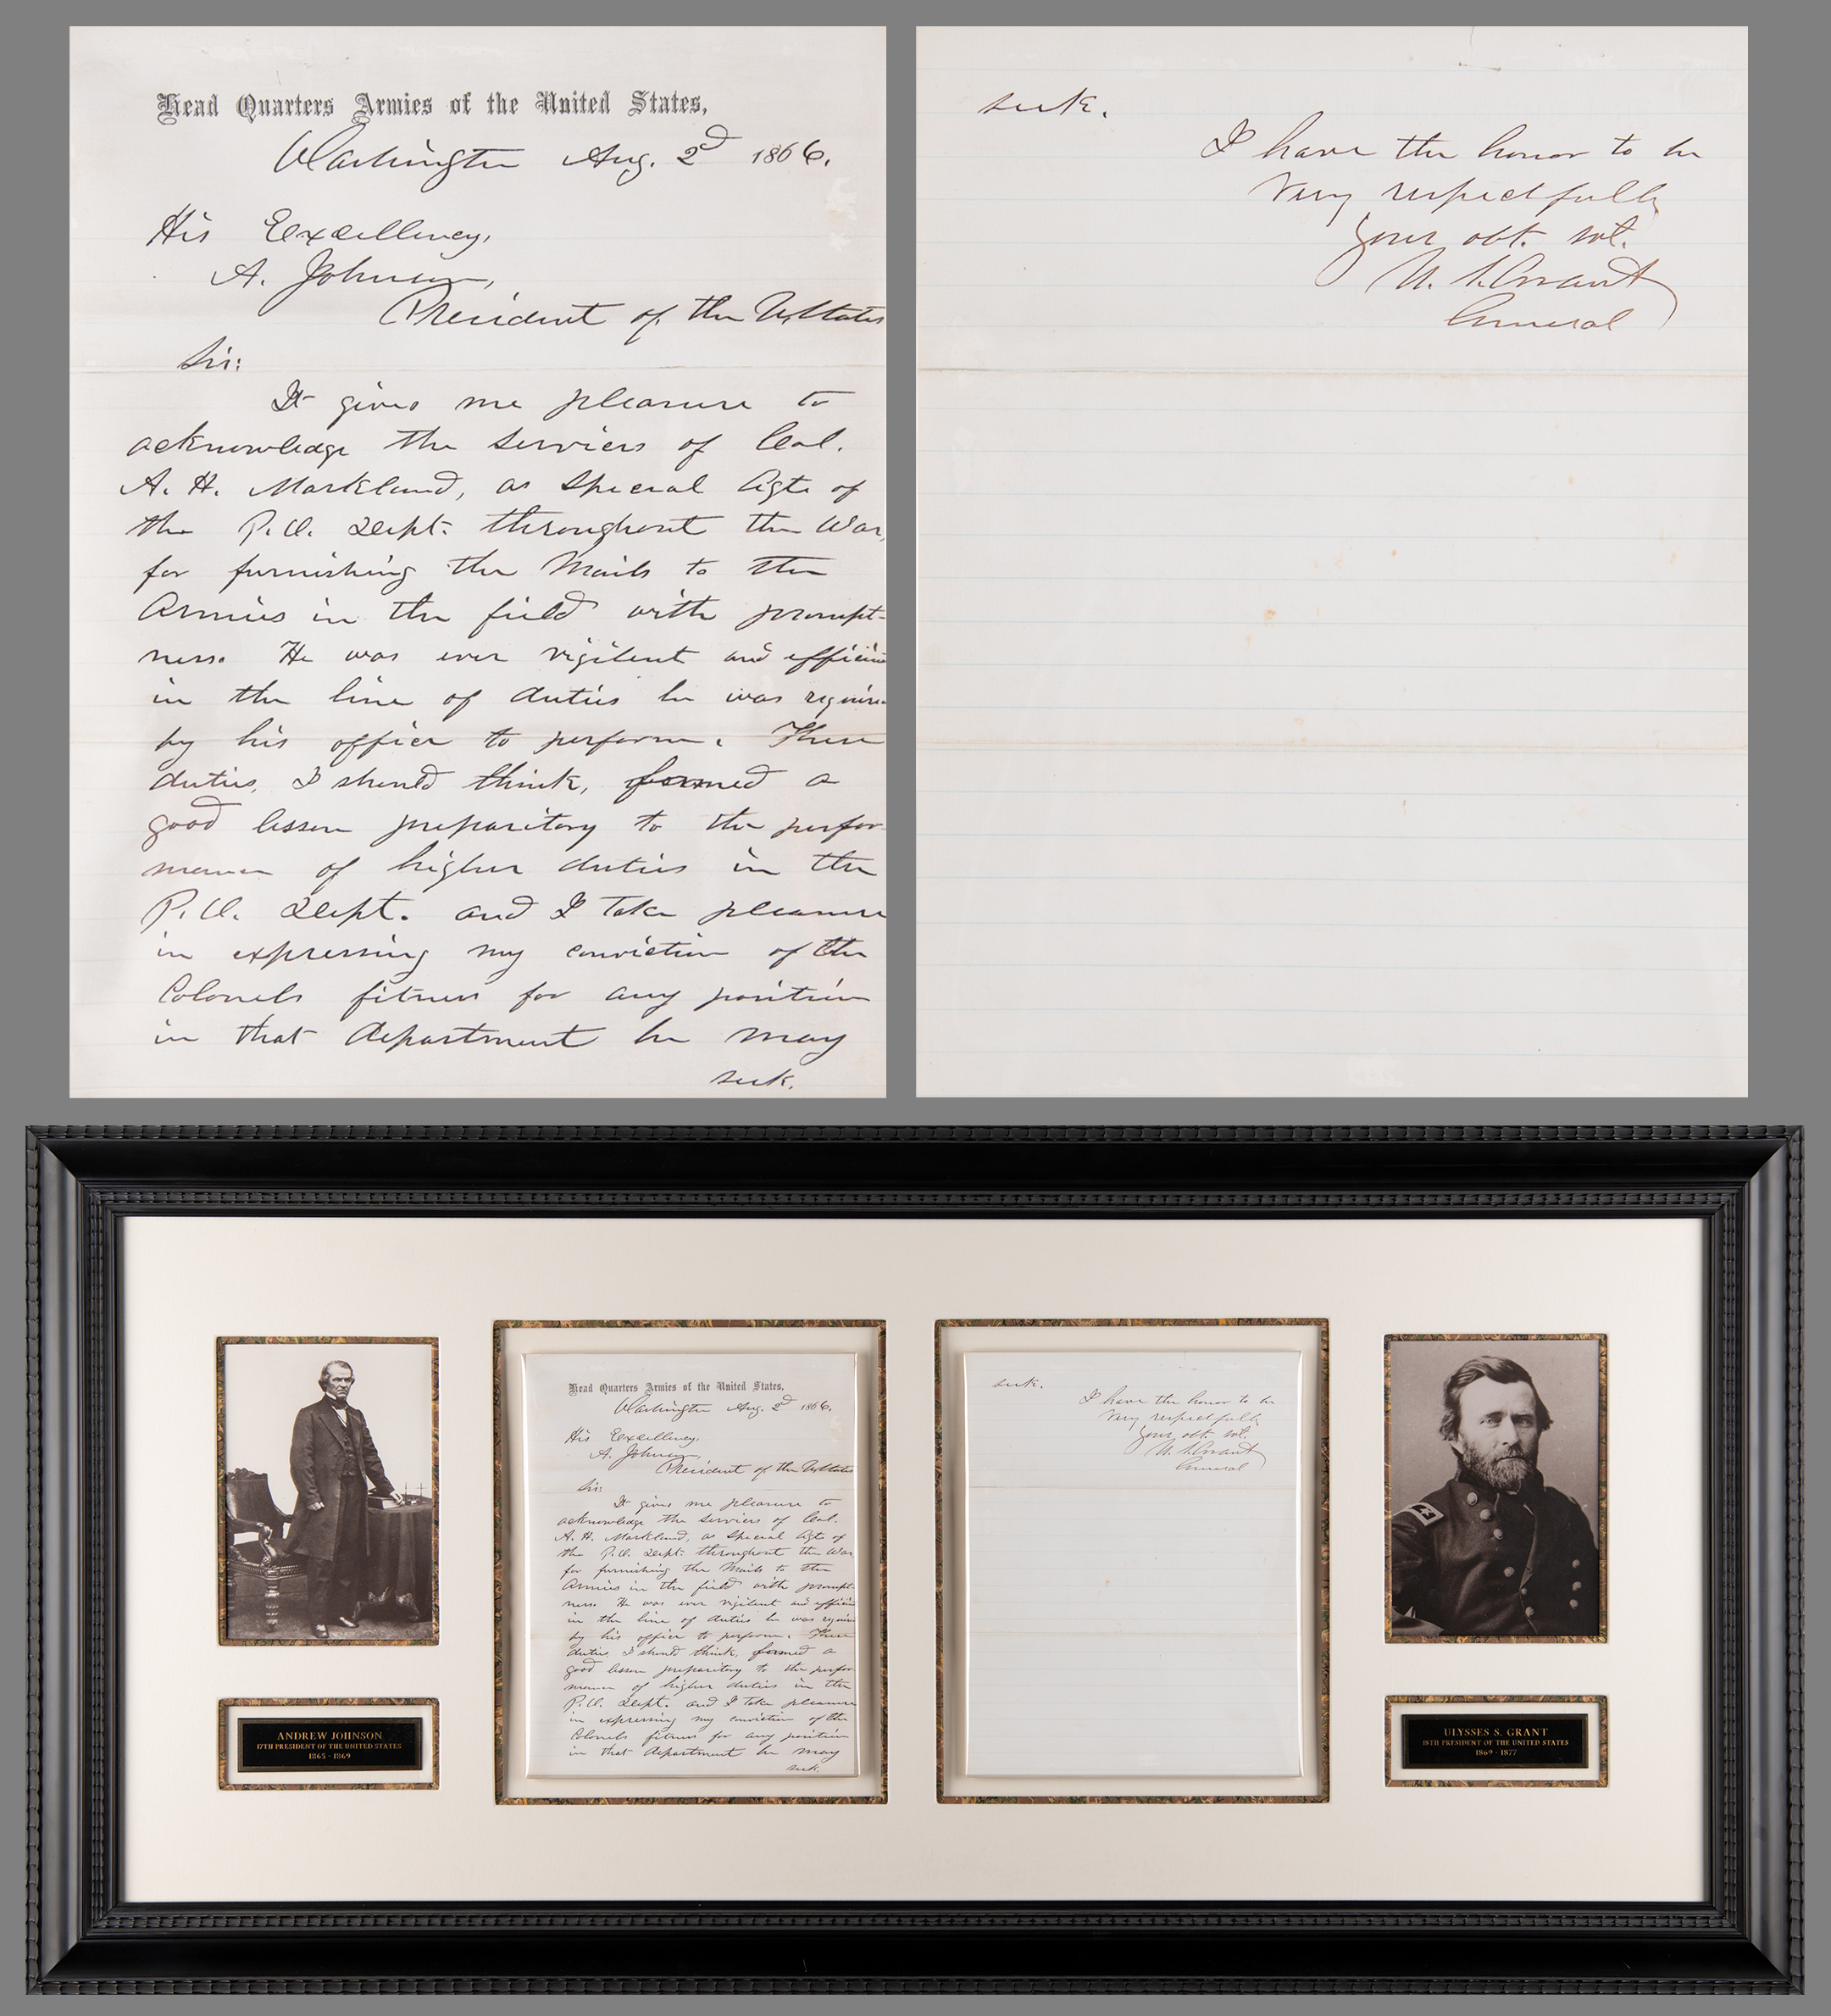 Lot #14 U. S. Grant Autograph Letter Signed to President Andrew Johnson, Recommending a Civil War Post Office Agent - Image 1